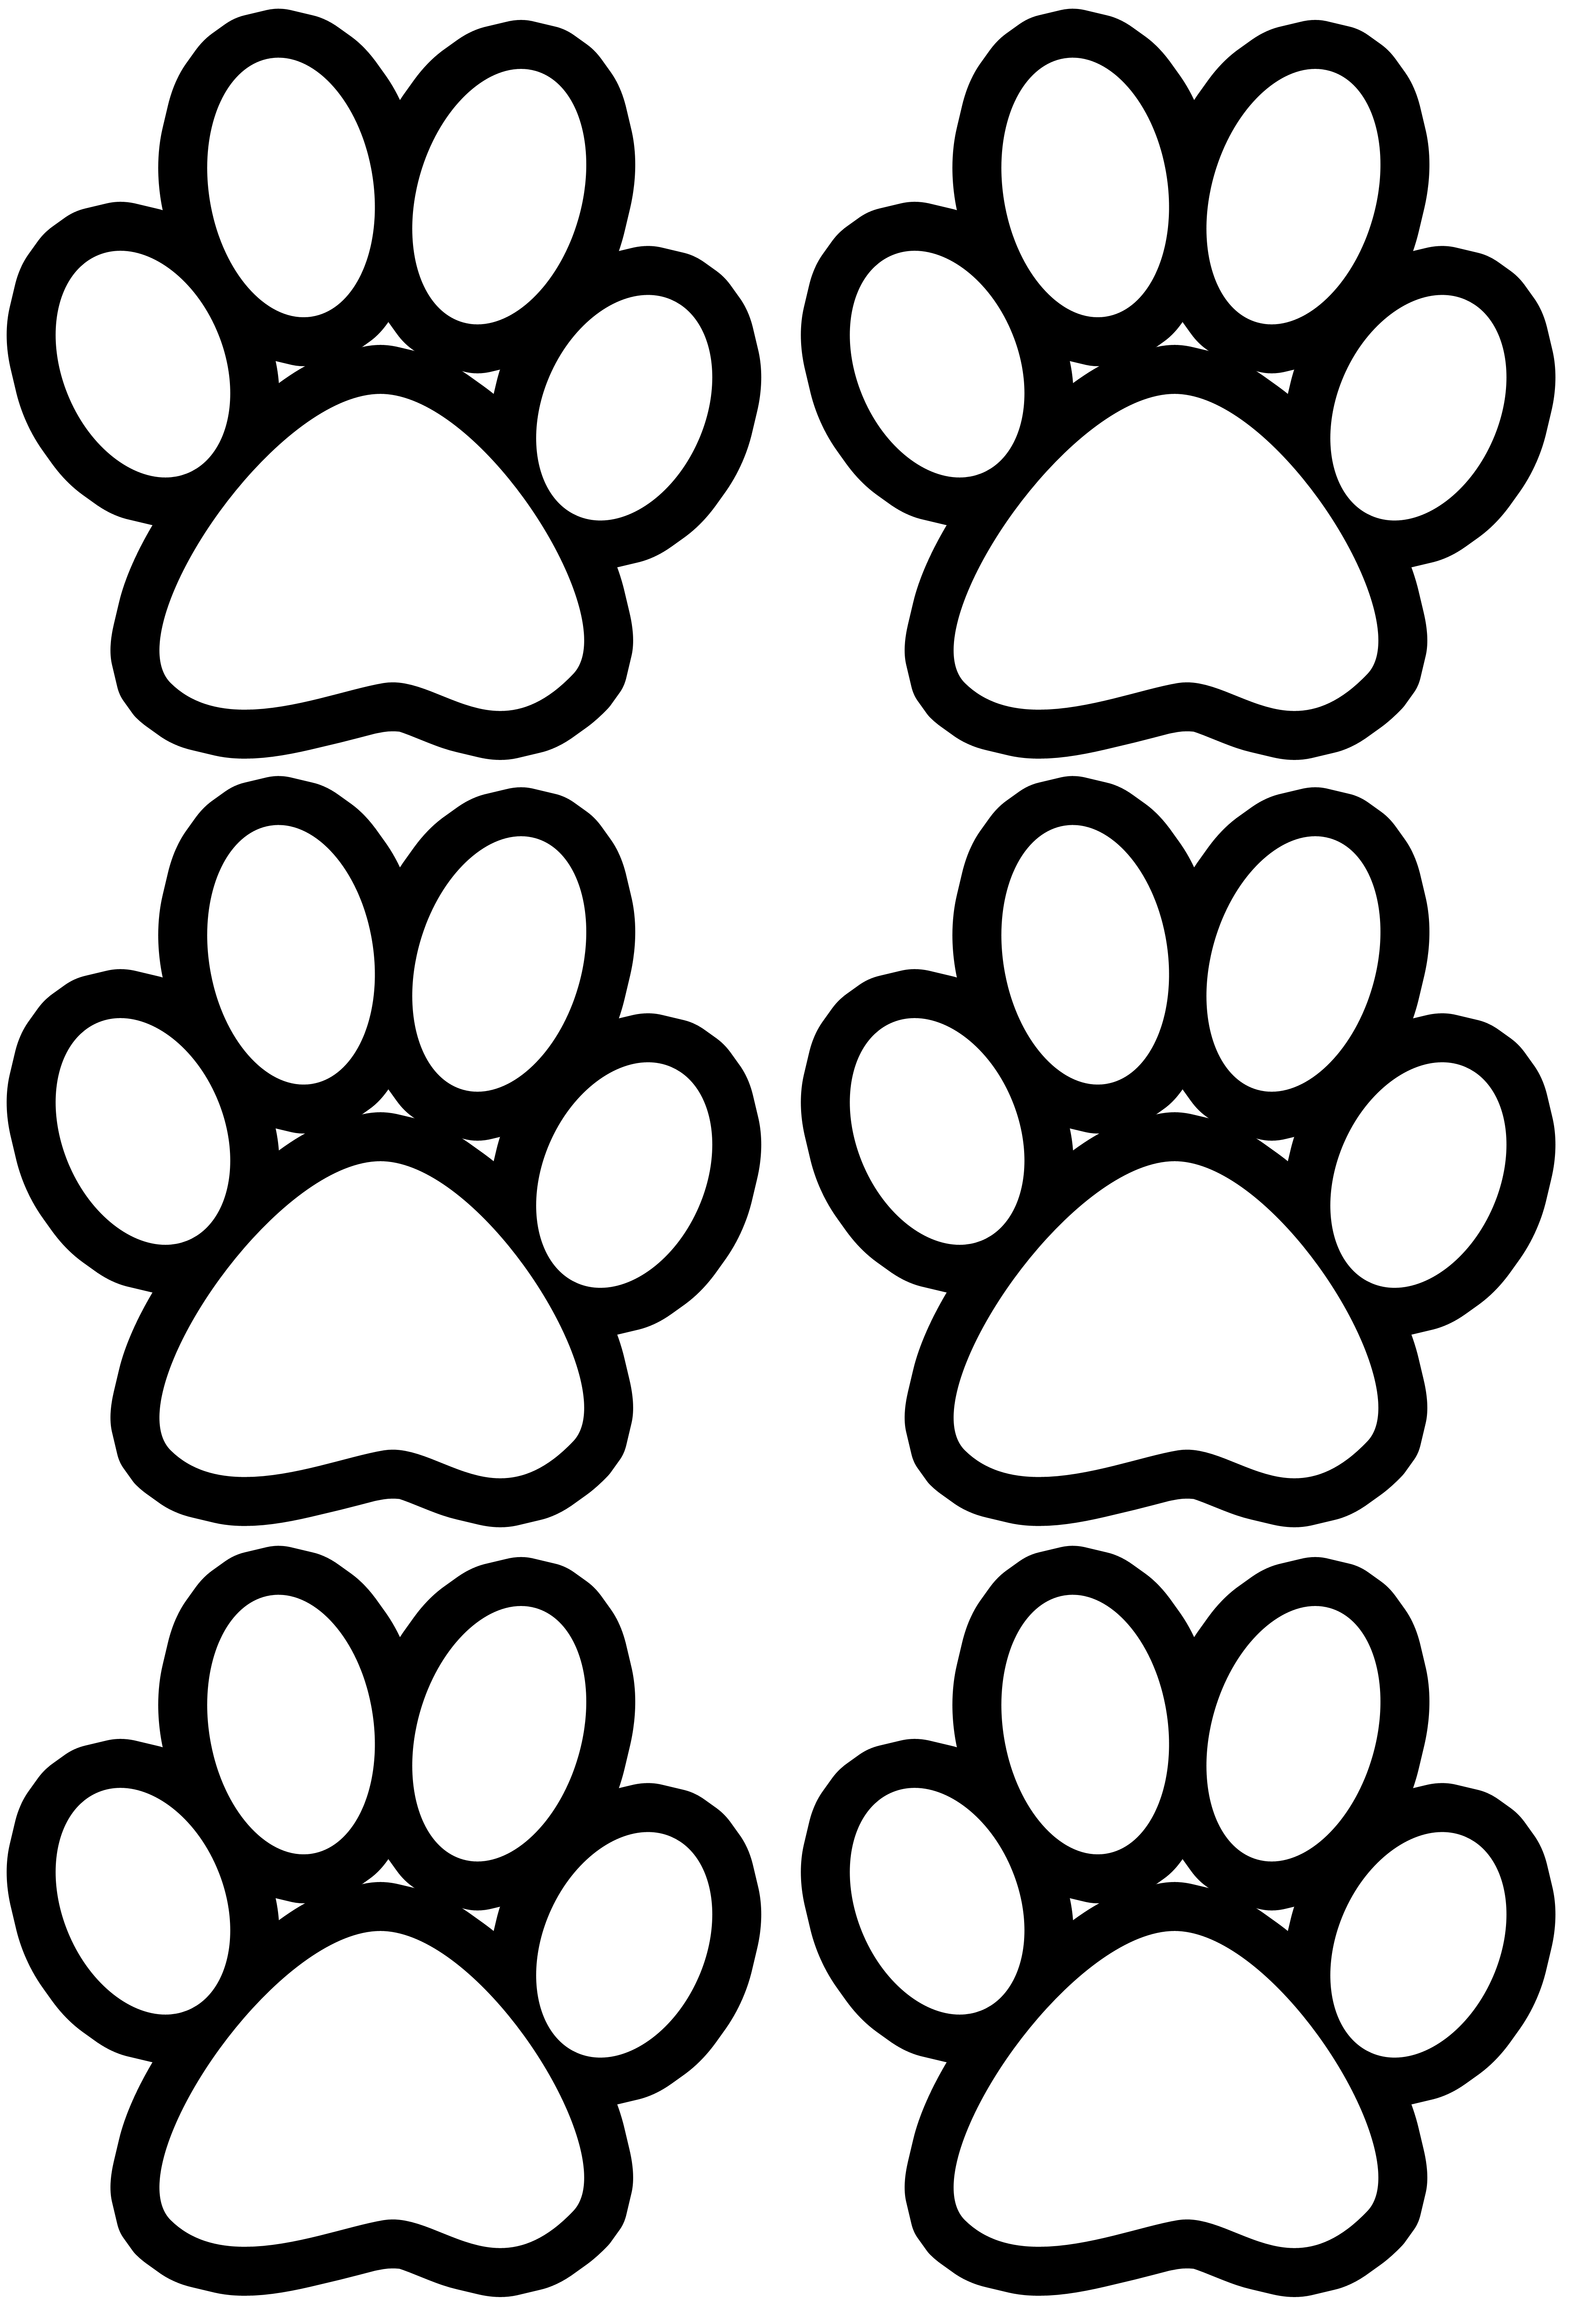 Magic free printable paw prints | Russell Website